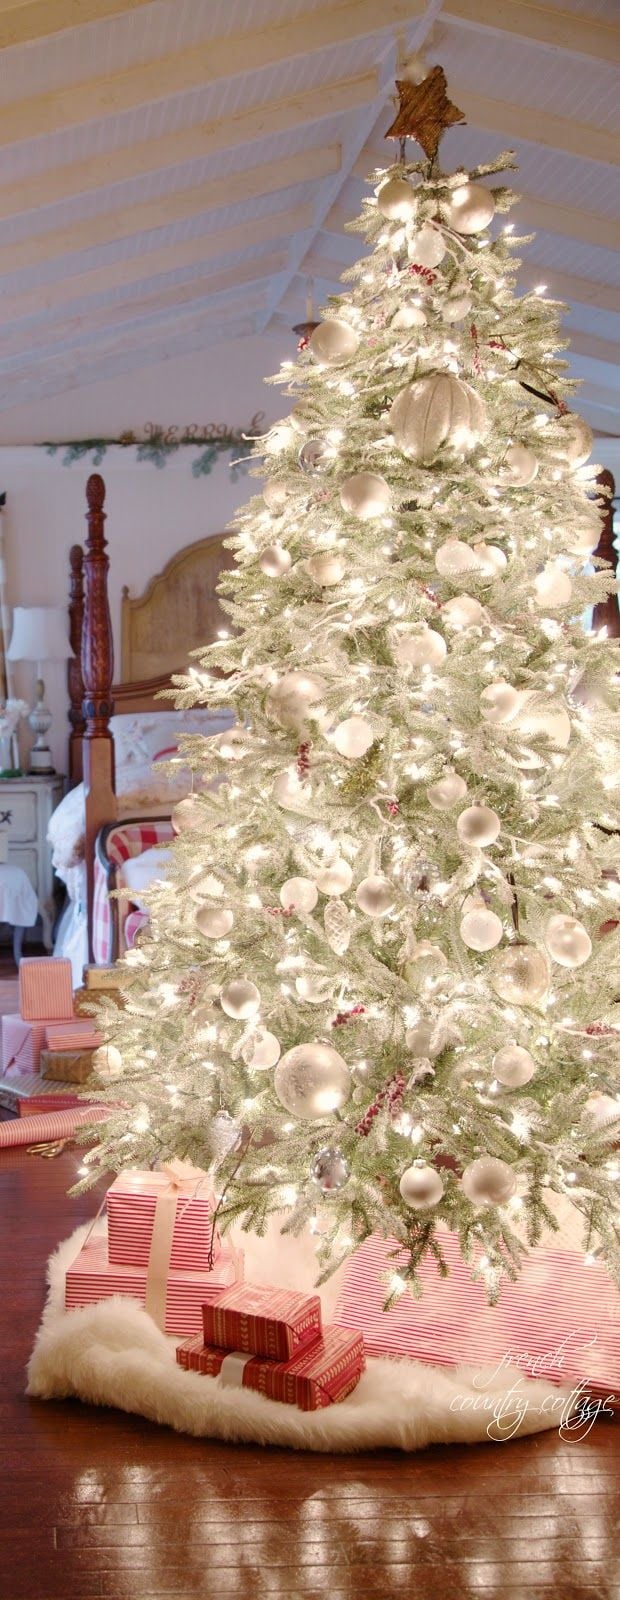 White and Silver Christmas Trees | Stay At Home Mum